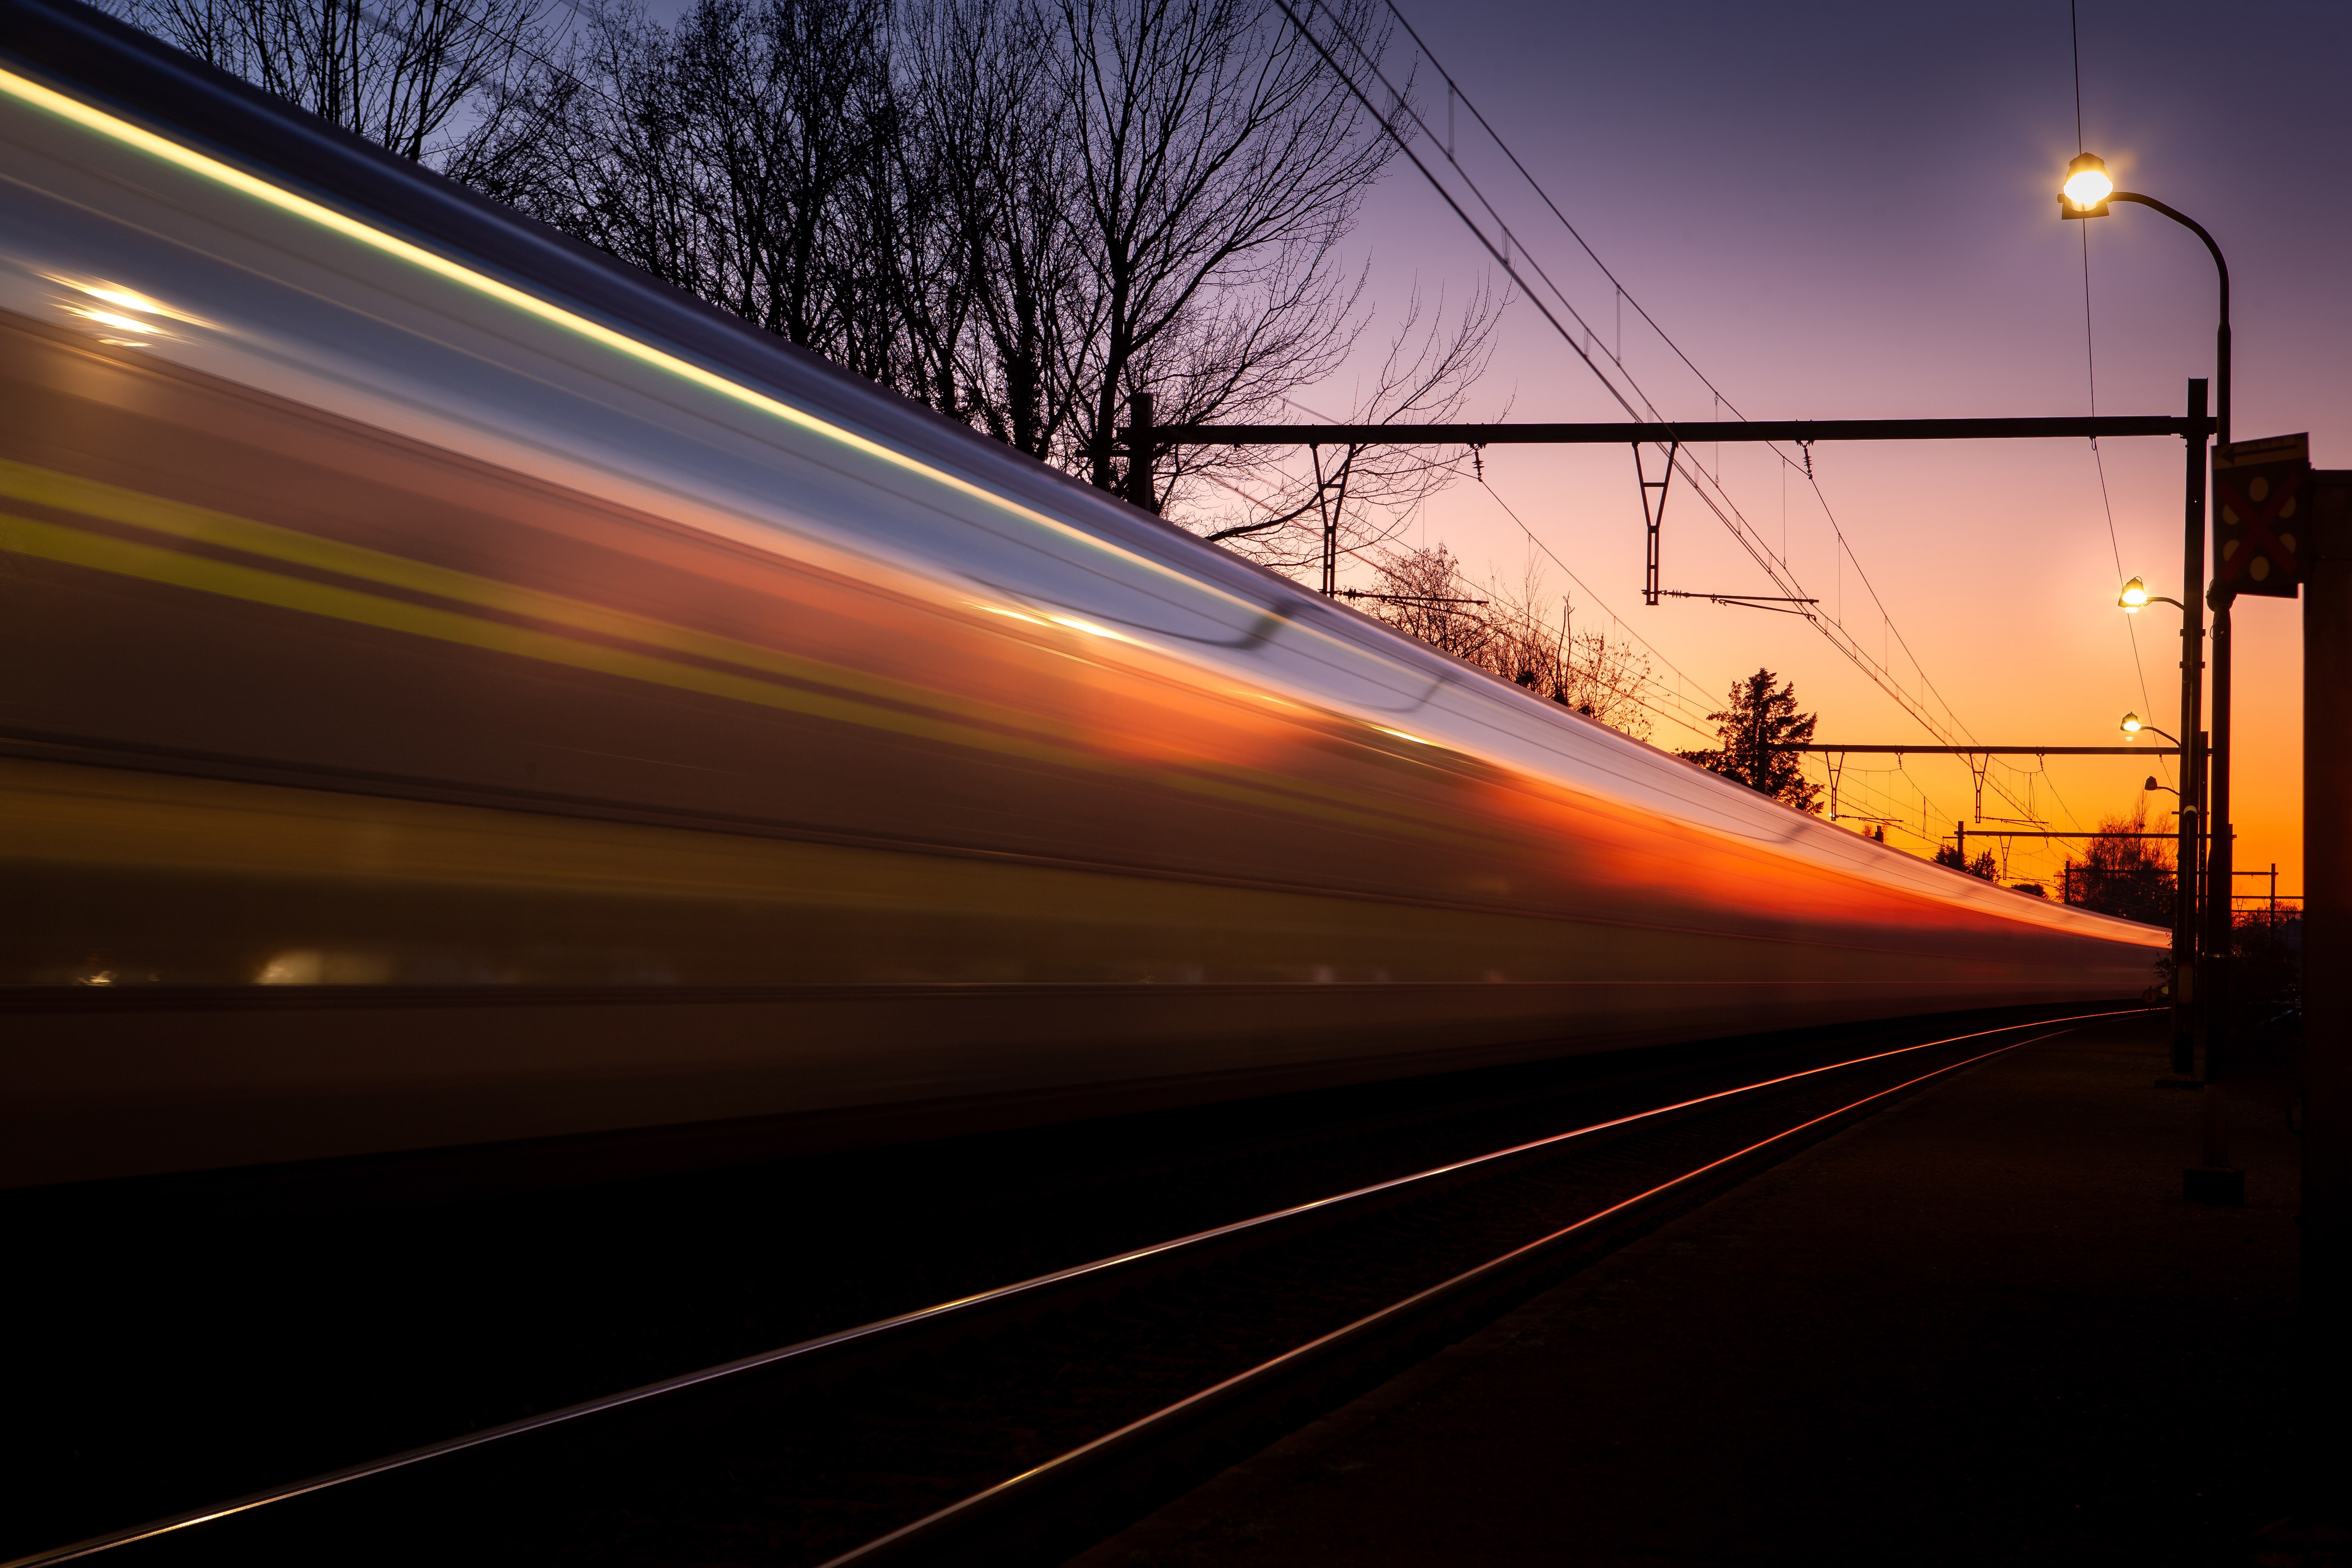 A blurred train zooming past the camera at sunset